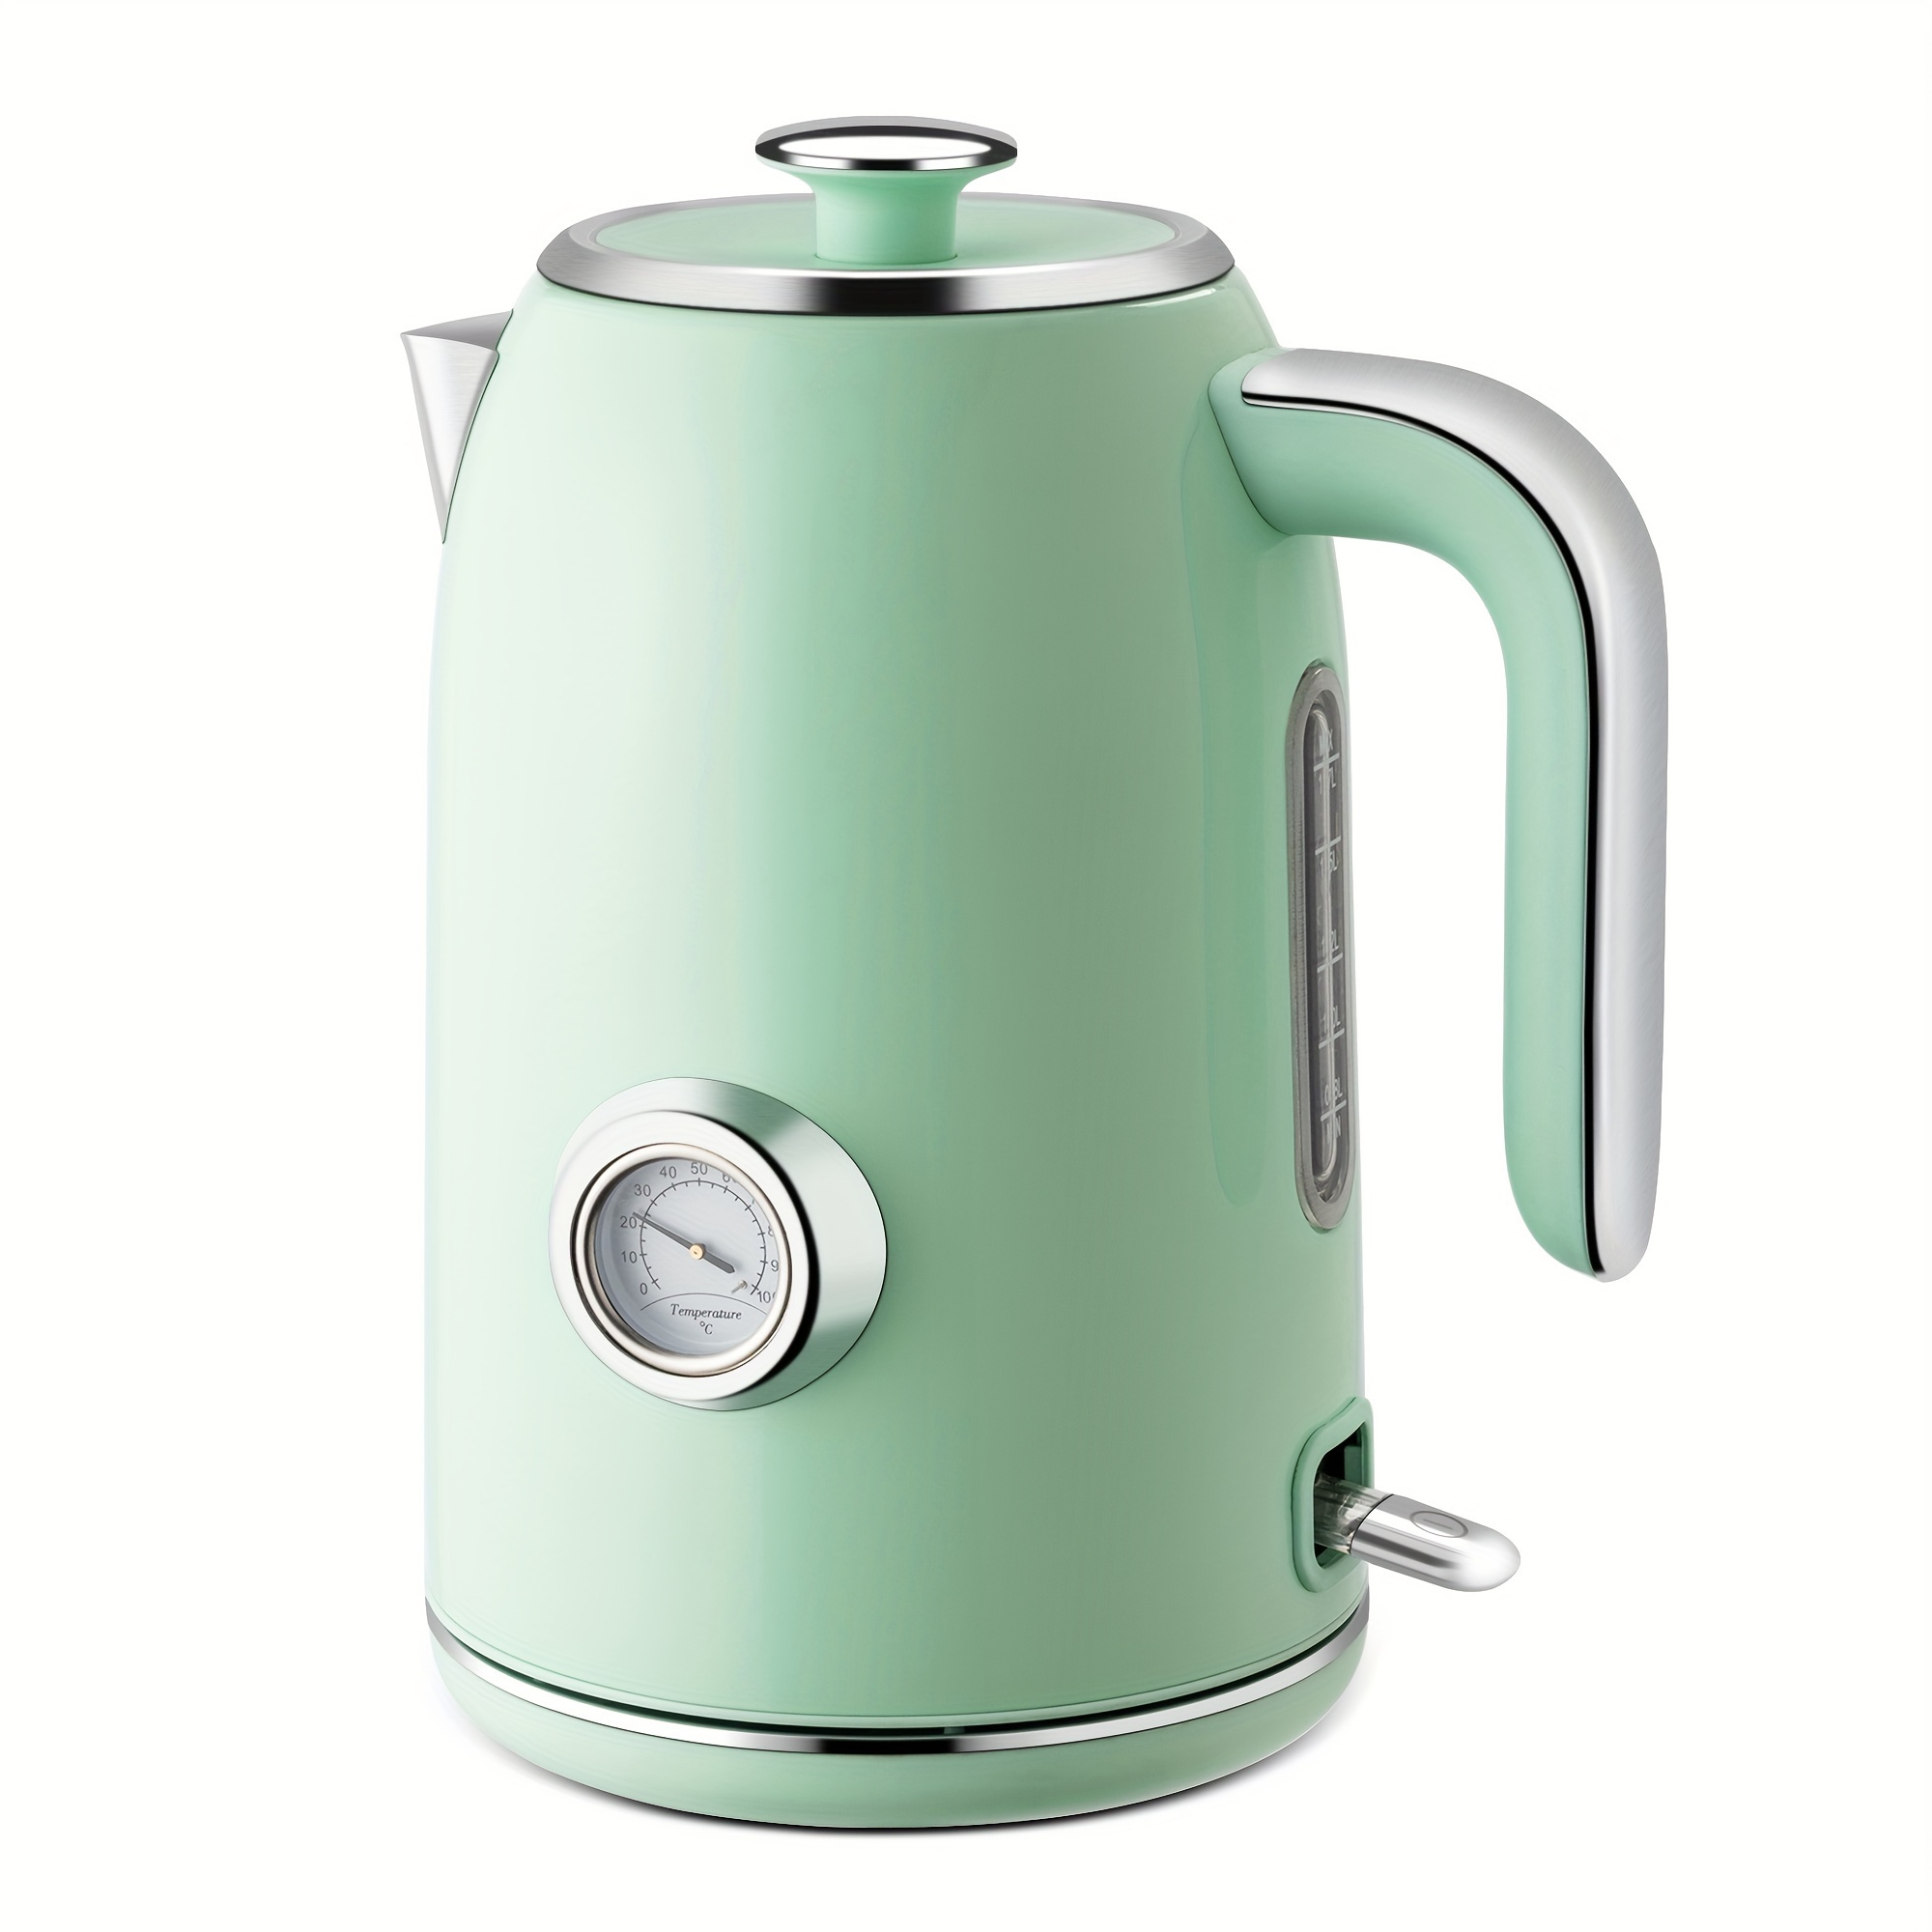 

Electric Kettle, 1.7l Stainless Steel Tea Kettle With Temperature Gauge, 1500w Water Boiler With Led Light, Bpa-free, Auto Shut-off And Boil-dry Protection.